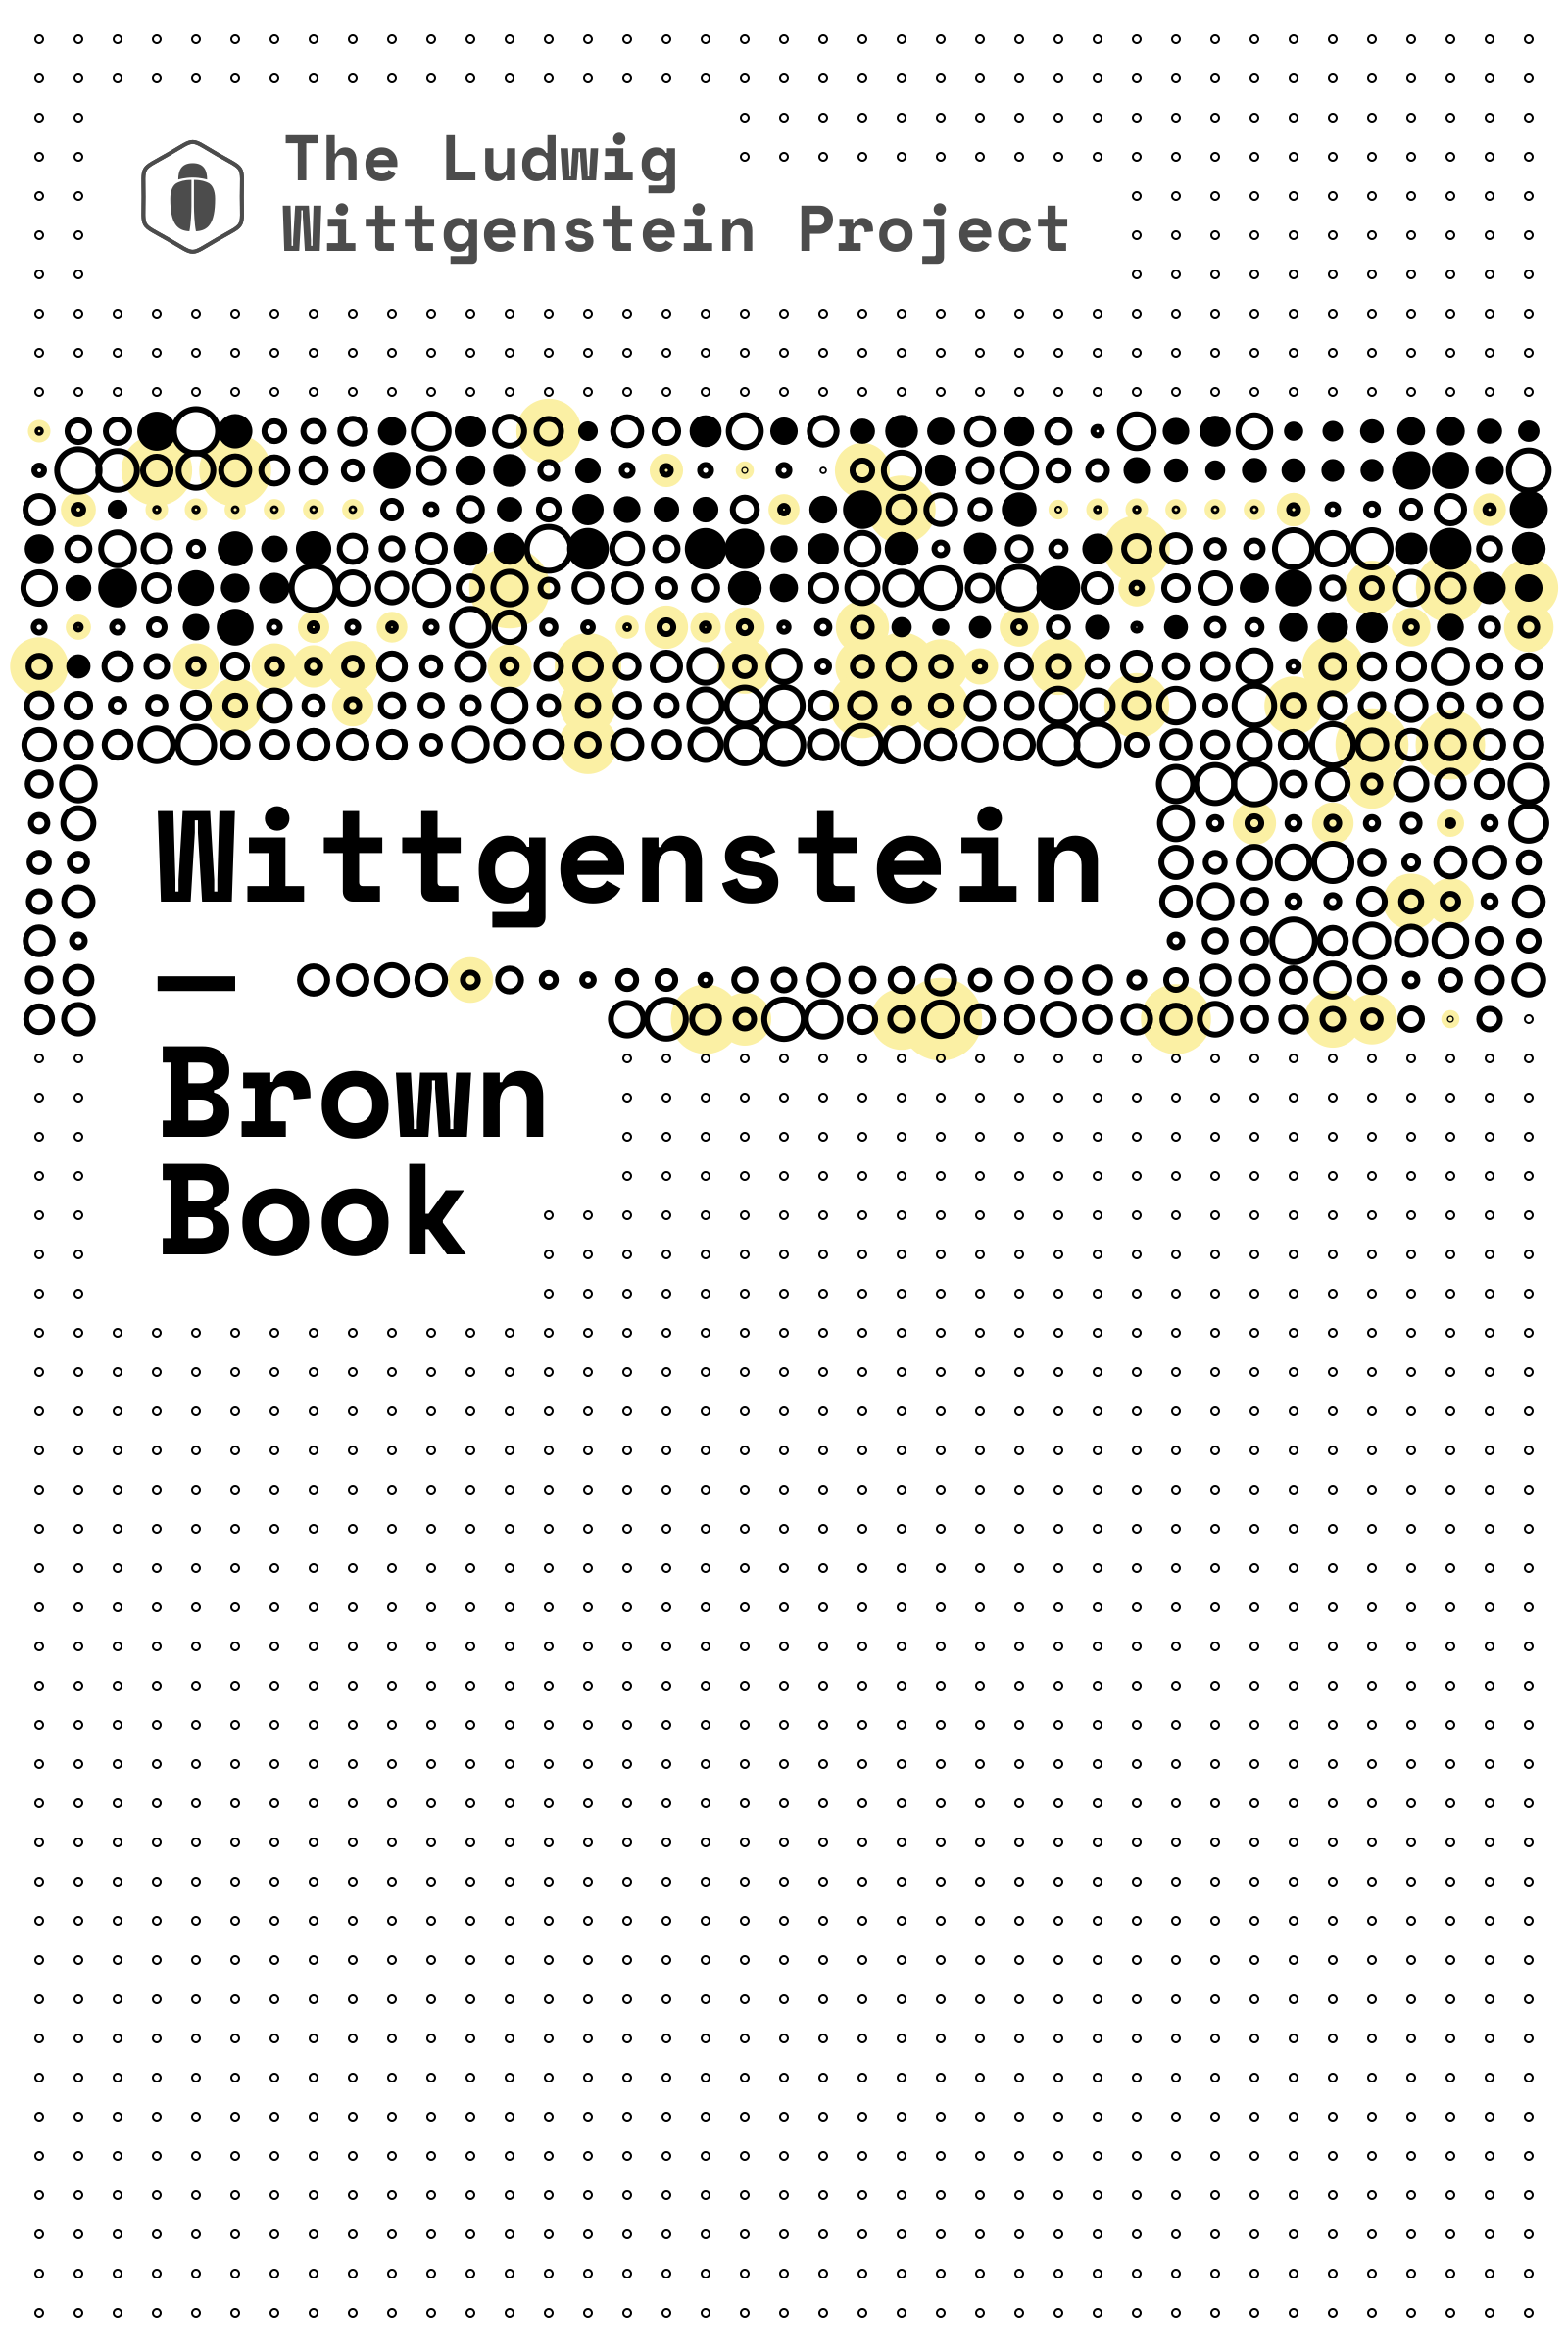 Brown Book cover